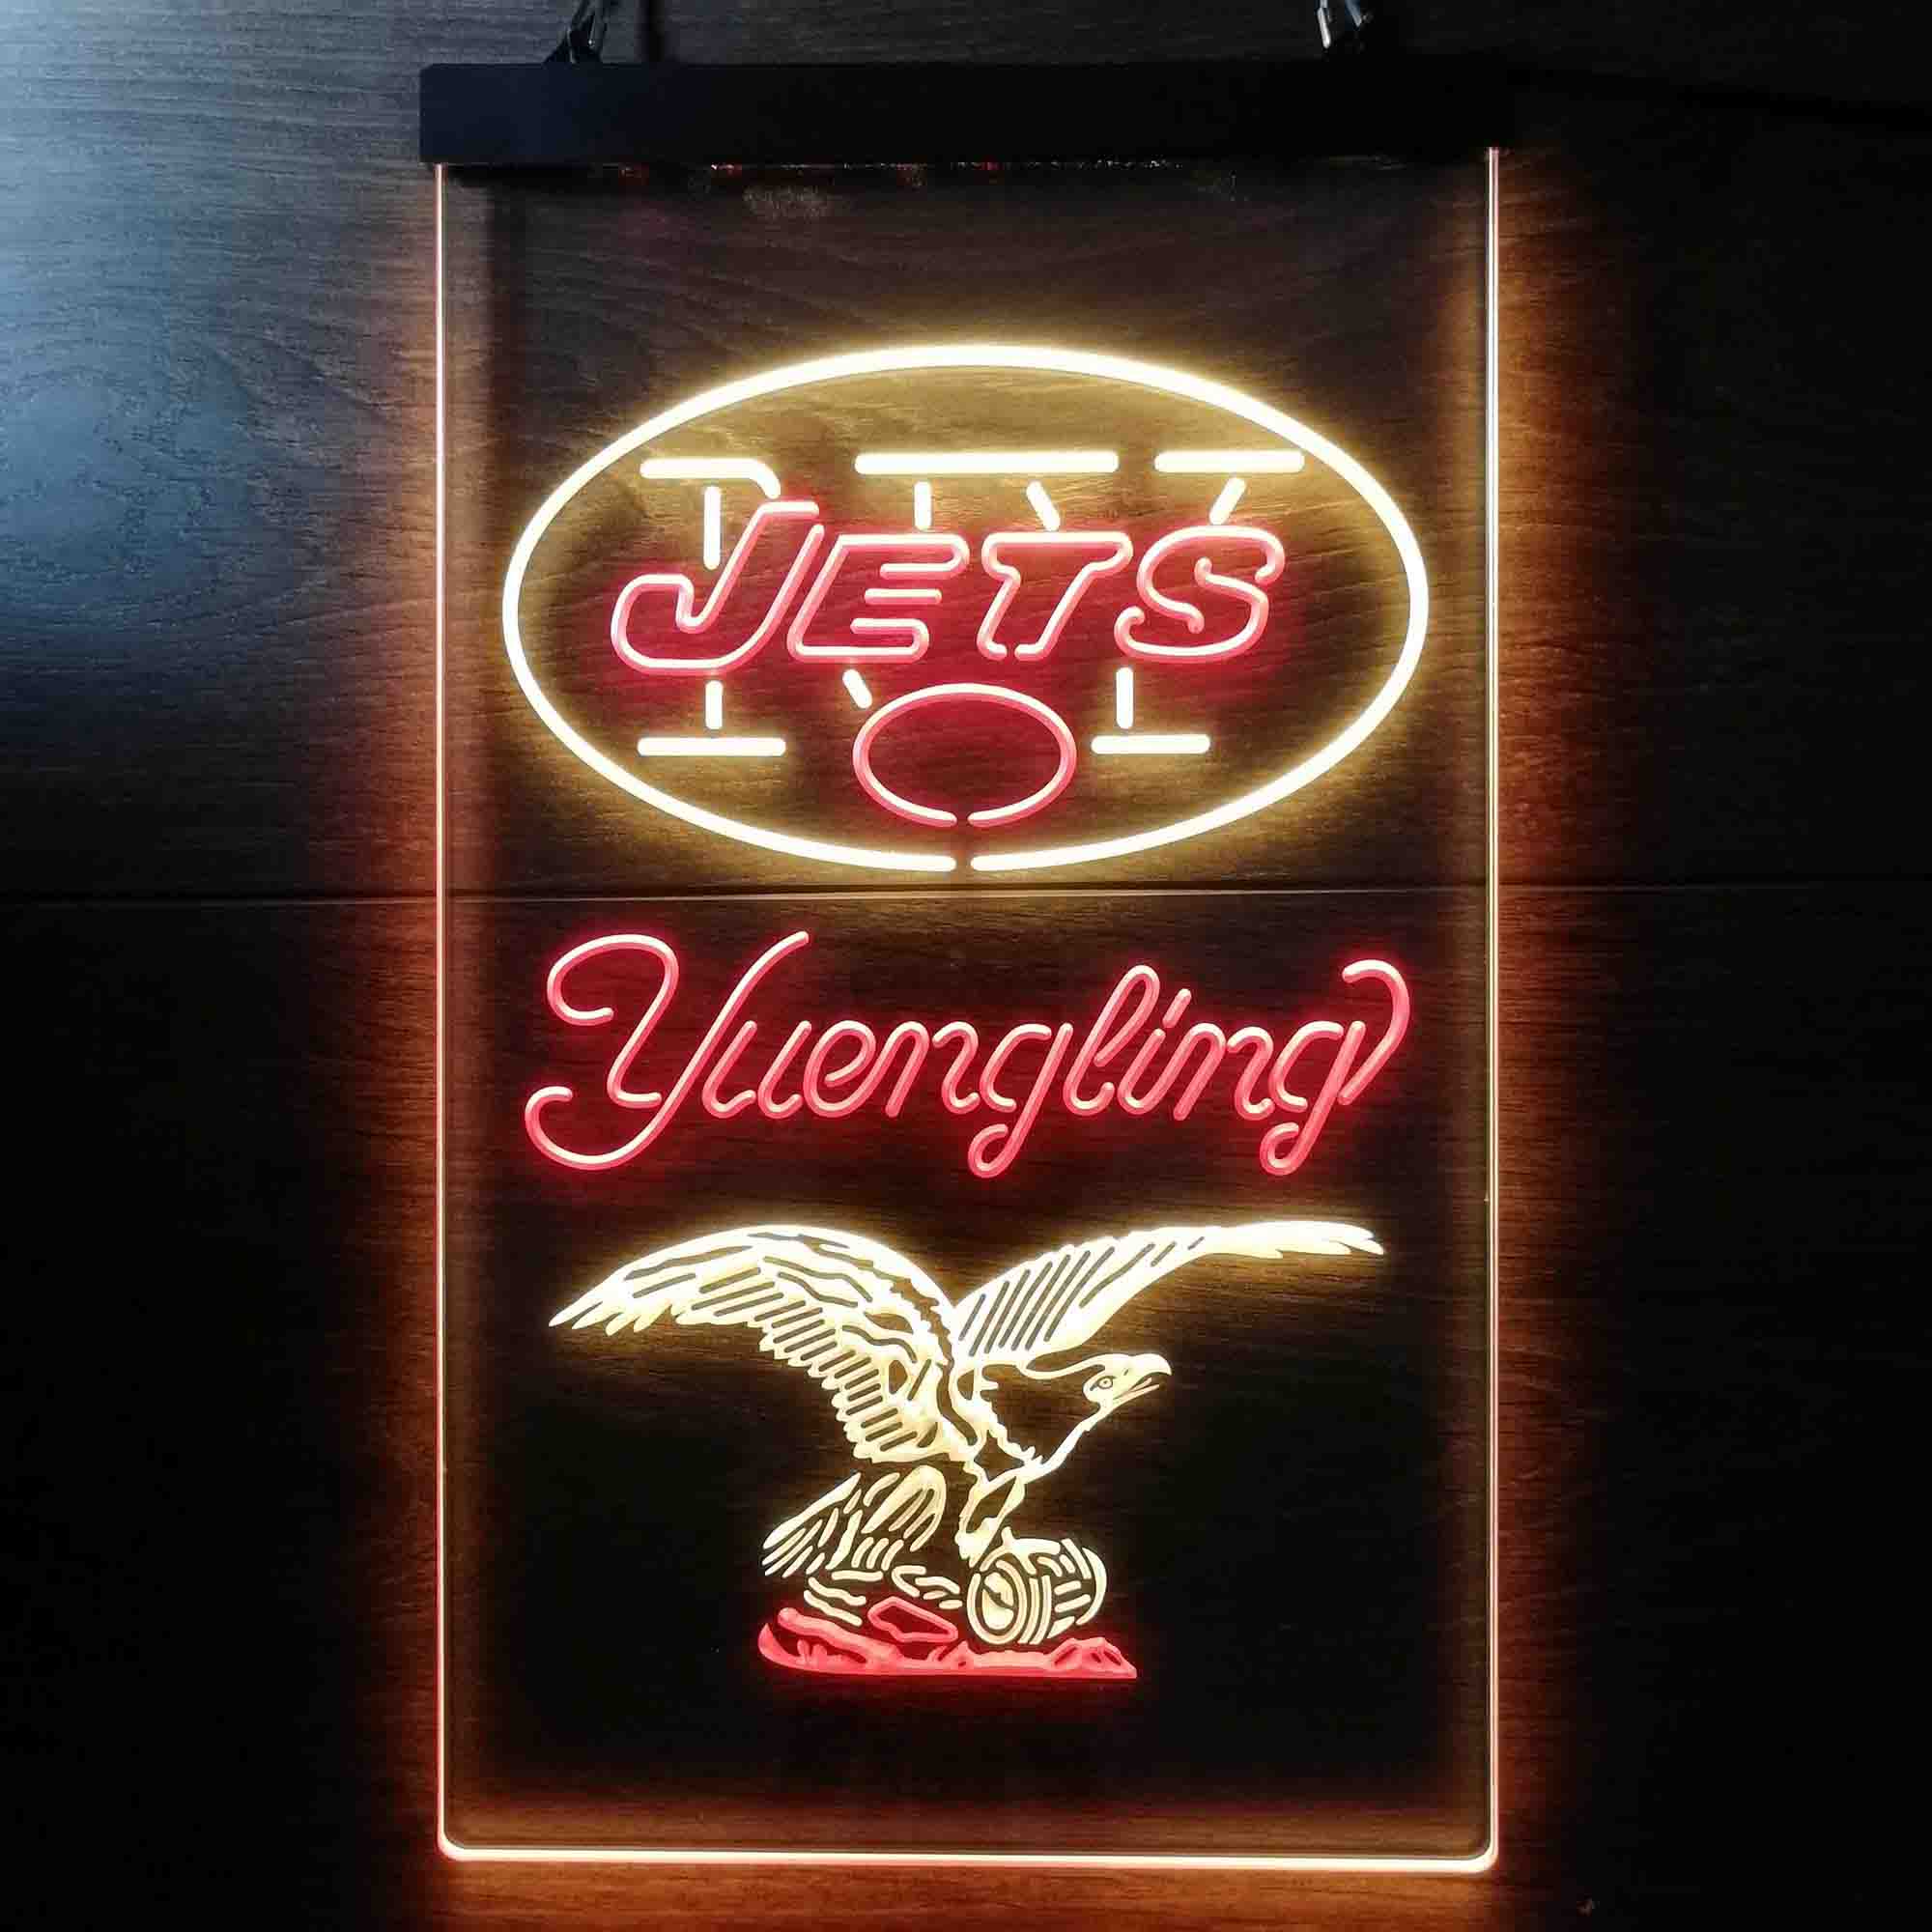 Yuengling Bar New York Jets Est. 1960 Neon-Like LED Sign